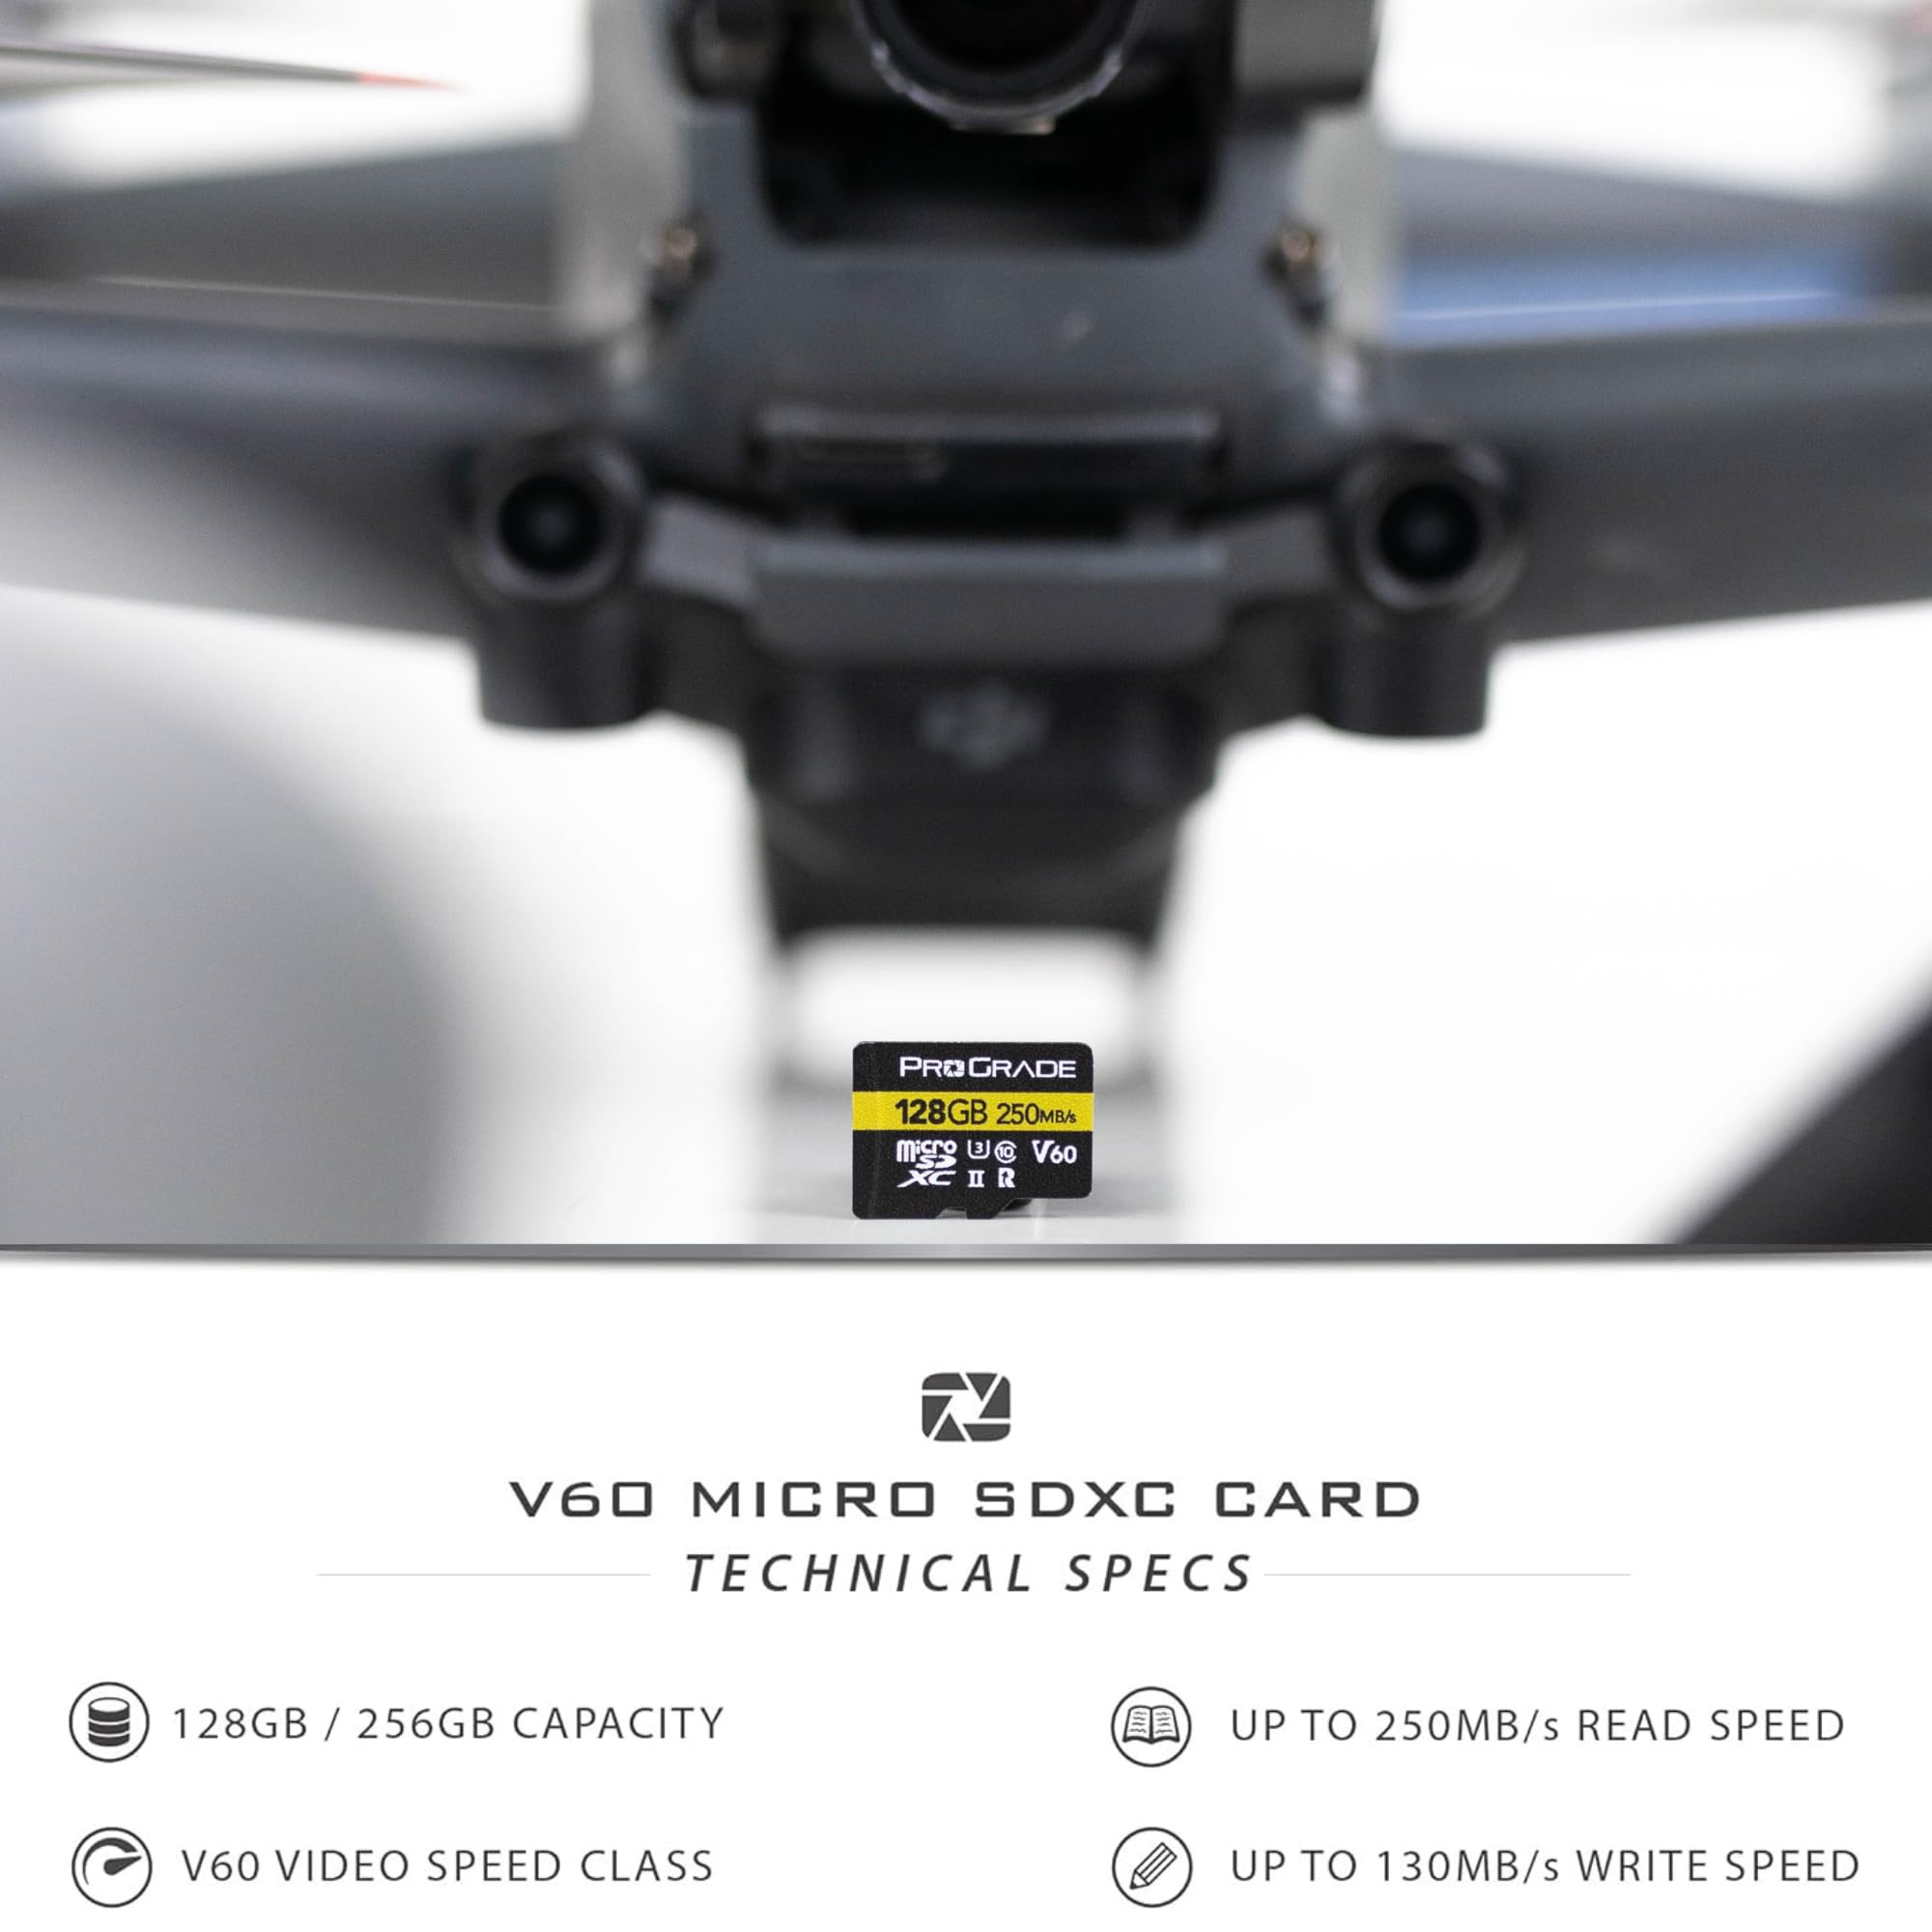 ProGrade Digital microSD Memory Card - V60 microSD Card for DSLR and Action Cameras - High Speed Transfer of Files & Large Storage - Up to 250MB/s Read and 130MB/s Write Speed 128 GB